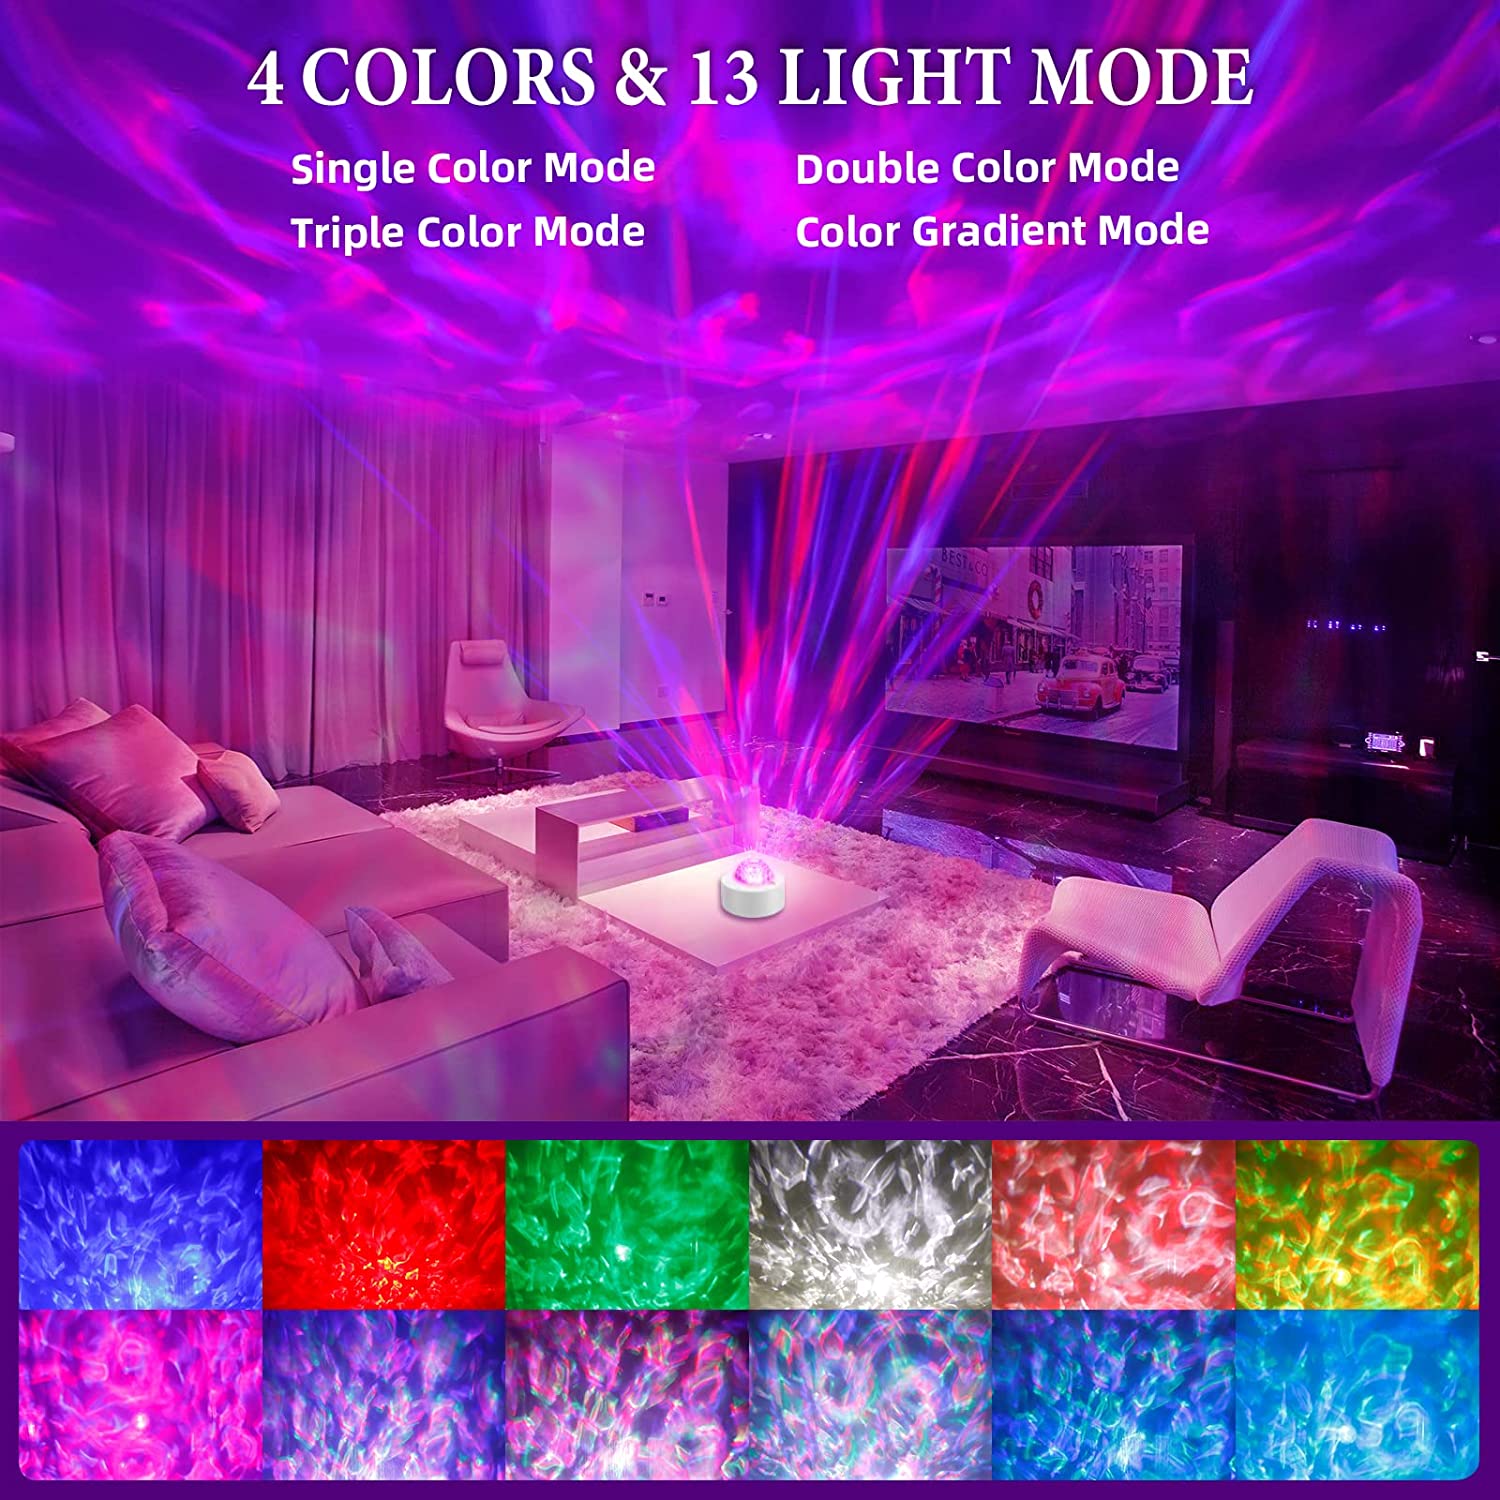 Moredig LED Galaxy Light Projector, 13-Color Ocean Wave Sensory Lights for Bedroom, Party, Game Rooms, Kids, Adults, Christmas Decor (Middle, 13 Colors) 4